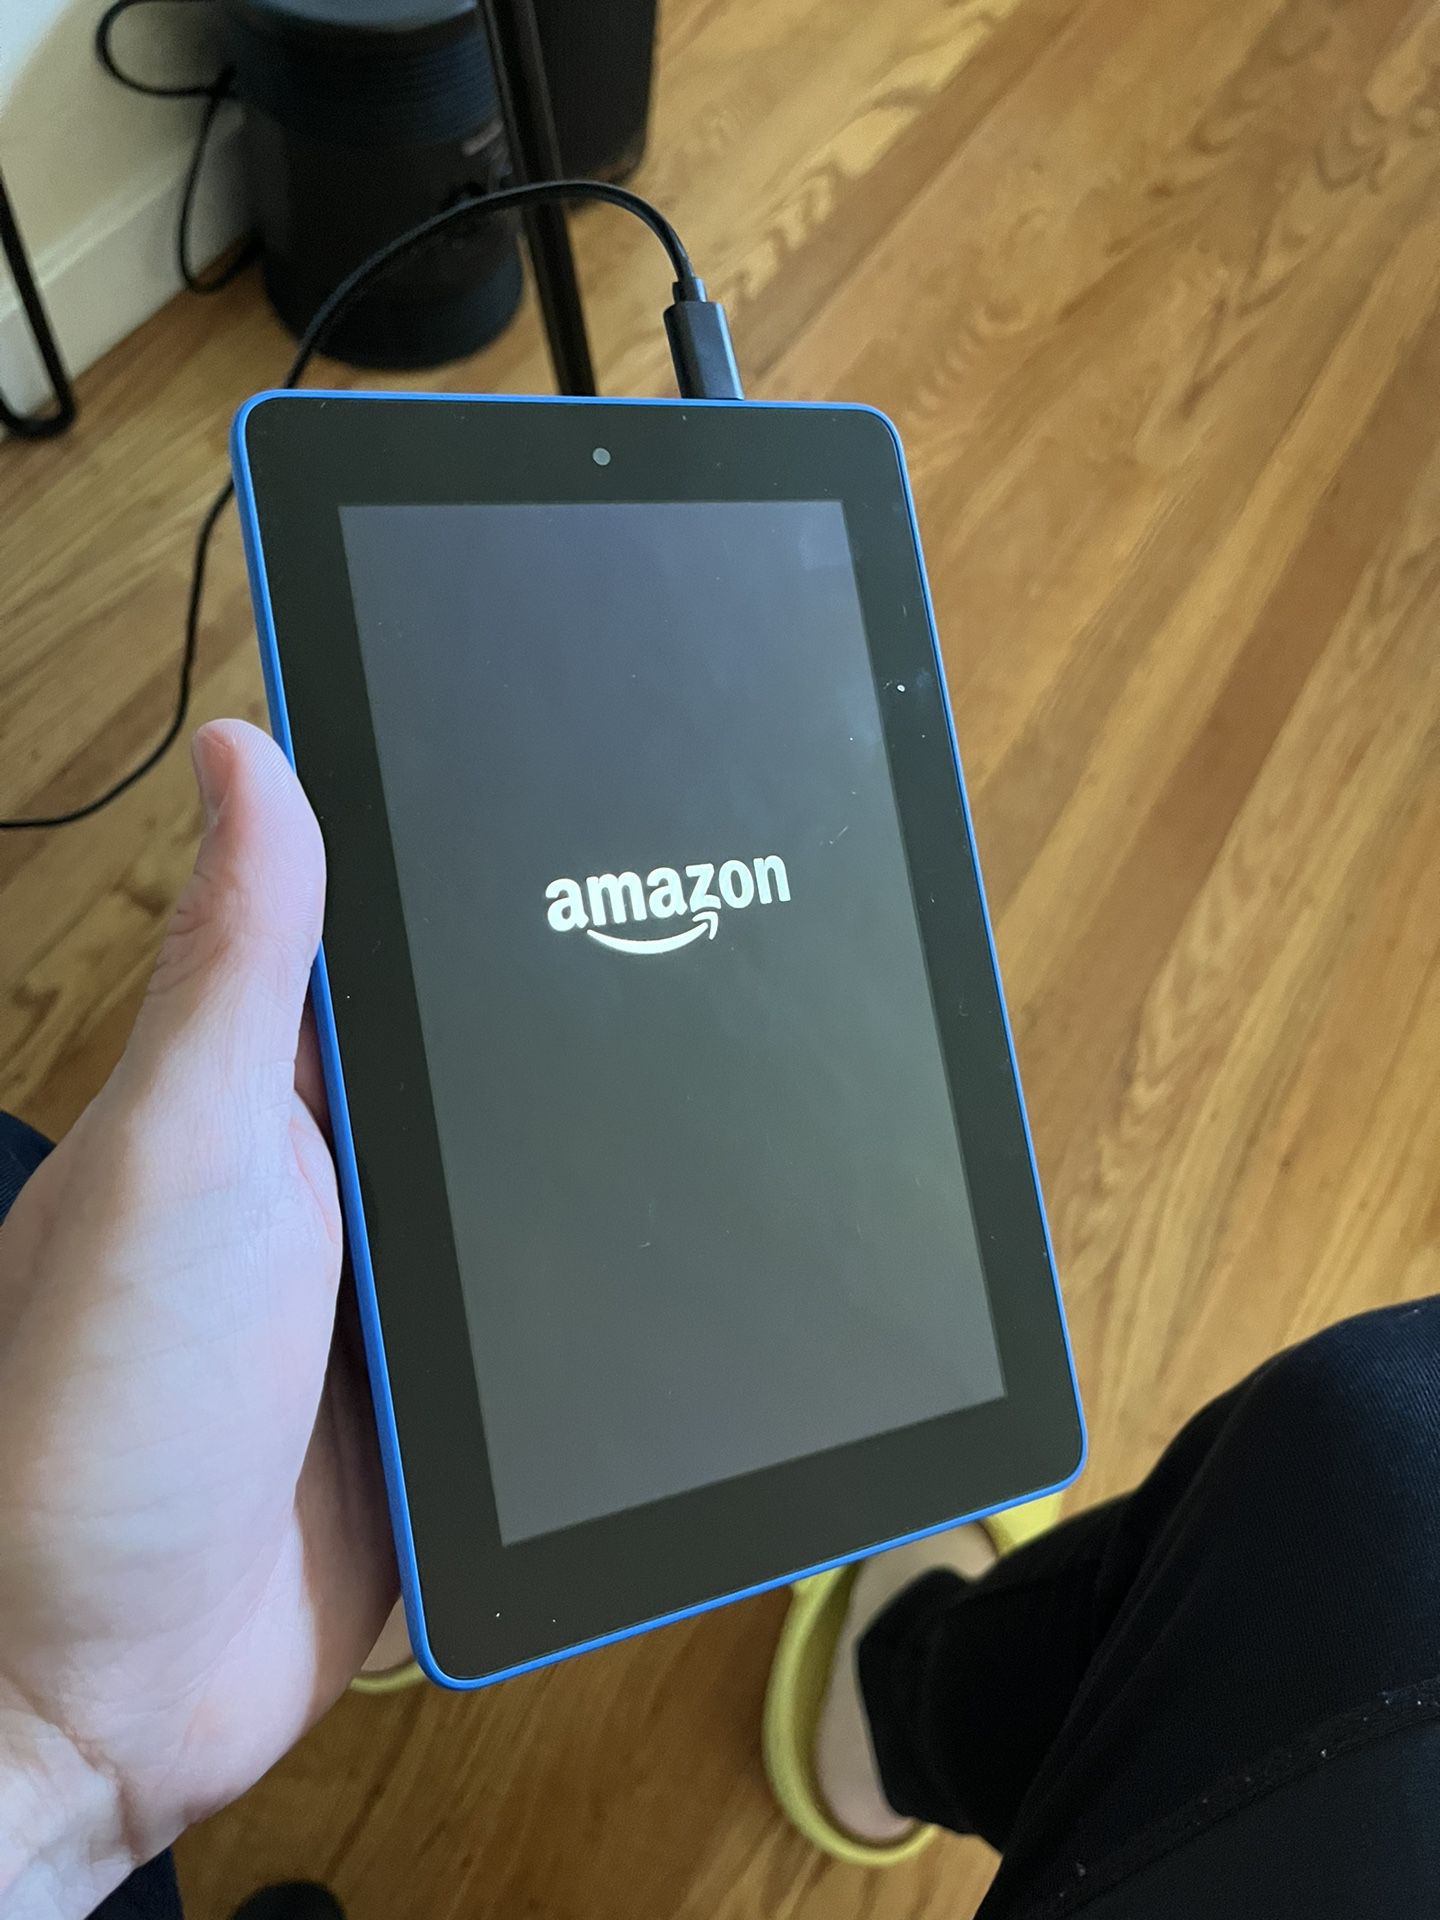 Amazon Fire Tablet *Only Works With Charger Connected*